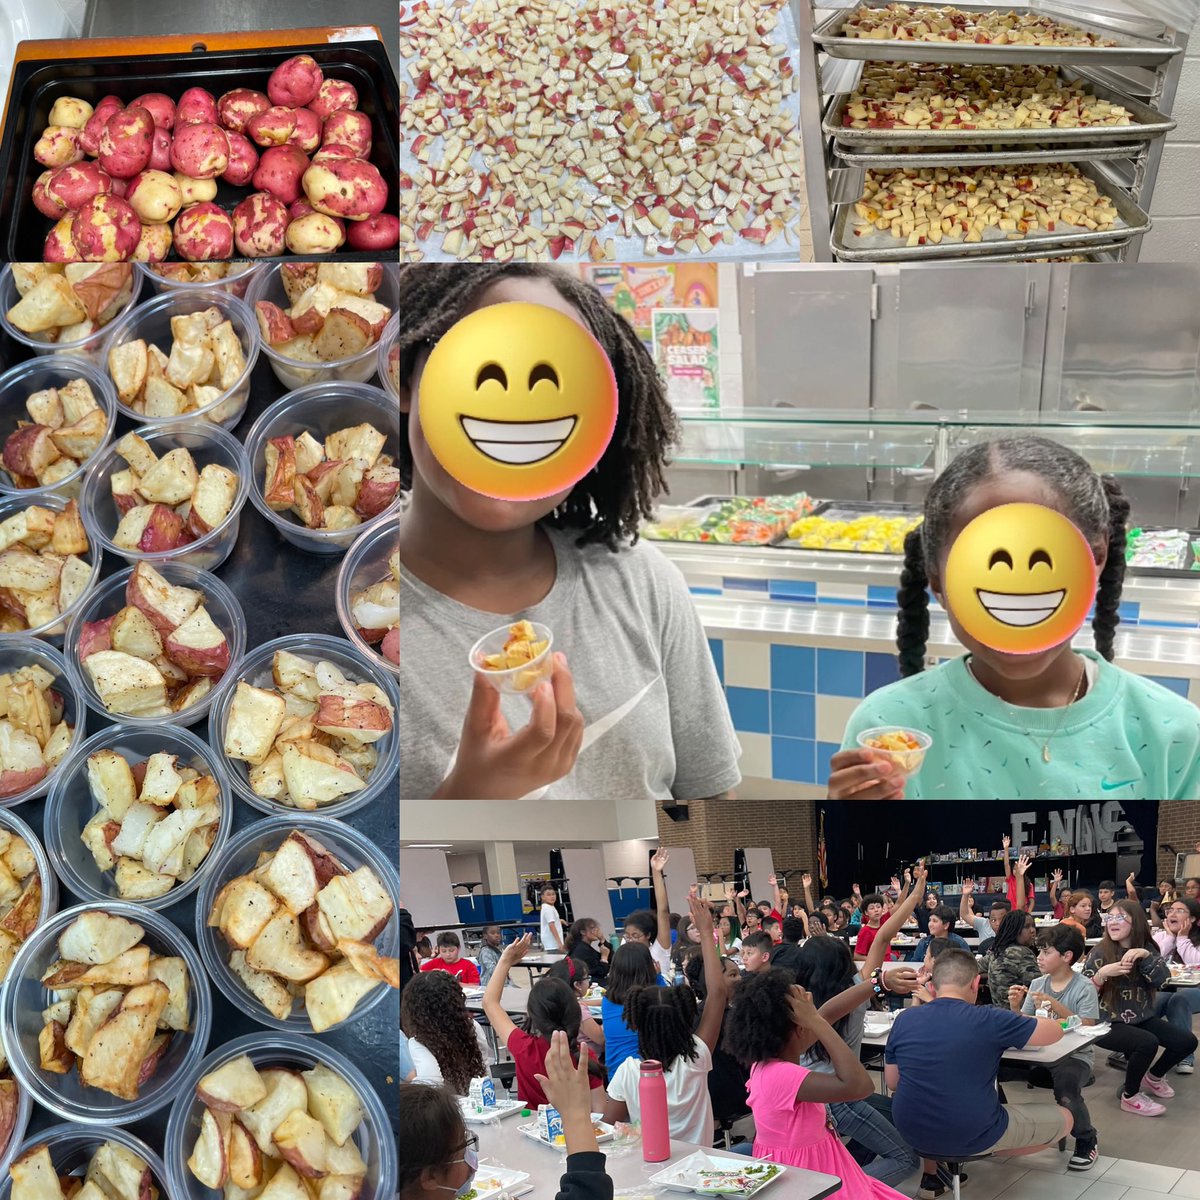 Today we served the yummy potatoes the students harvested @cfisdowens 🥔 😁 they loved them, and were even asking for seconds!!! @PowerUpCafe @MsPaoliVegaRTGG